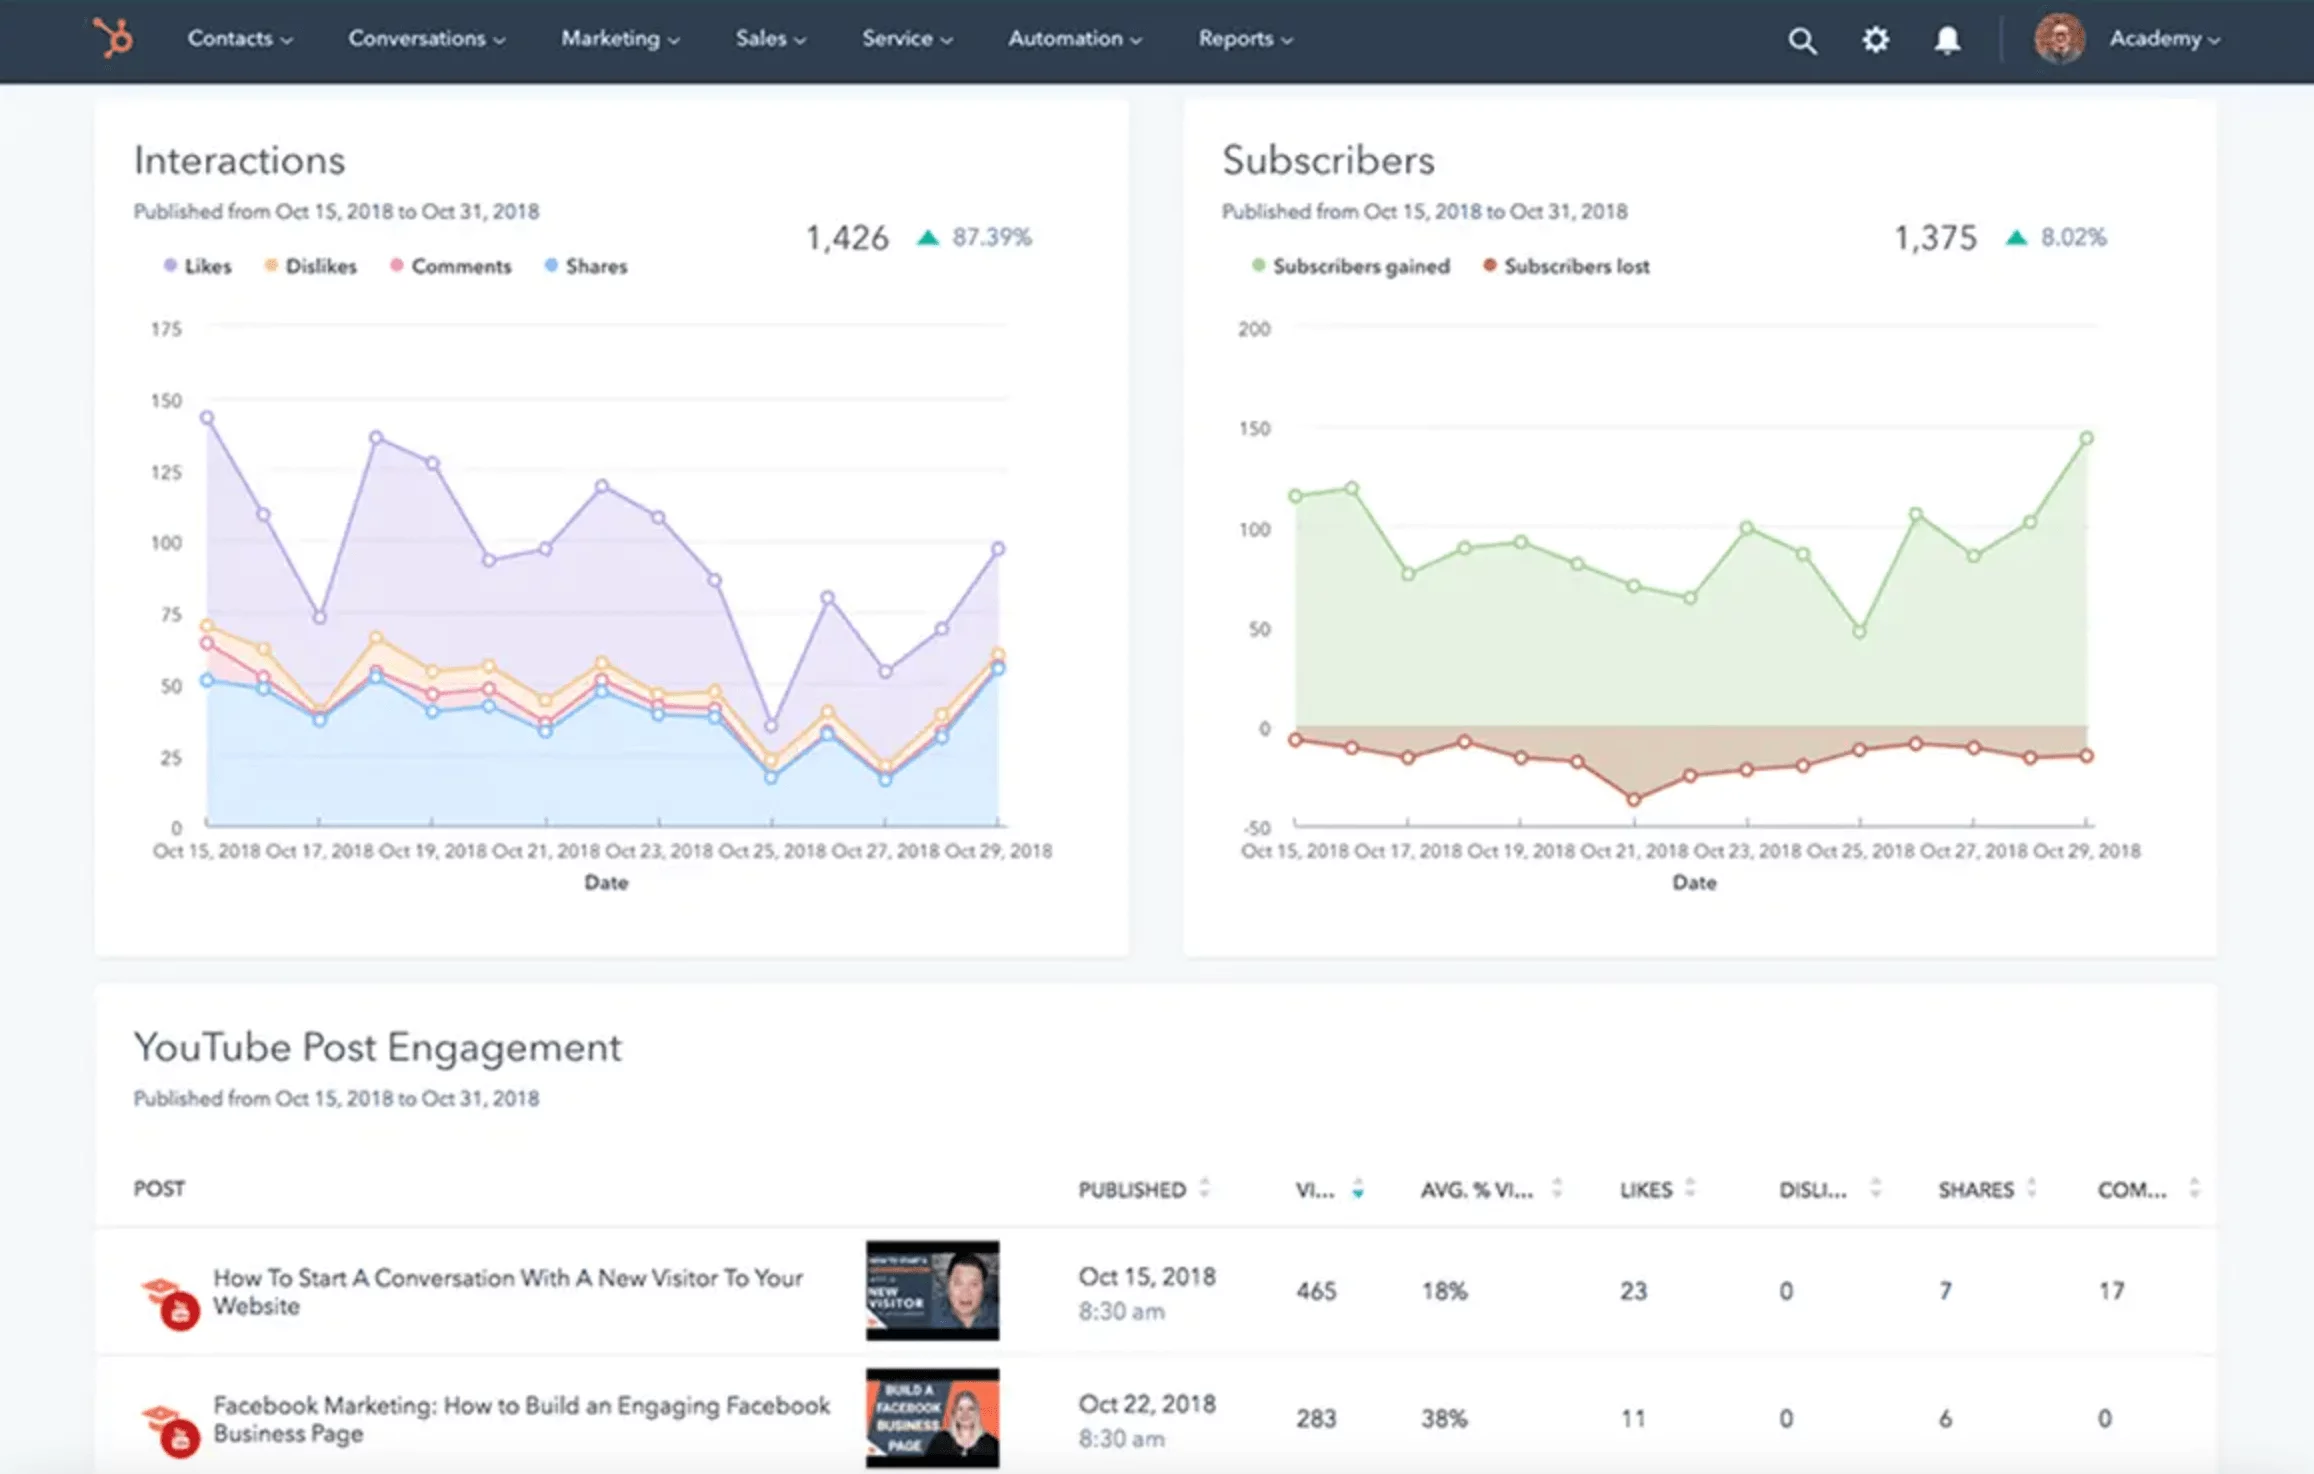 Hubspot's social media marketing roi reporting tool for interactions, subscribers and youtube post engagement